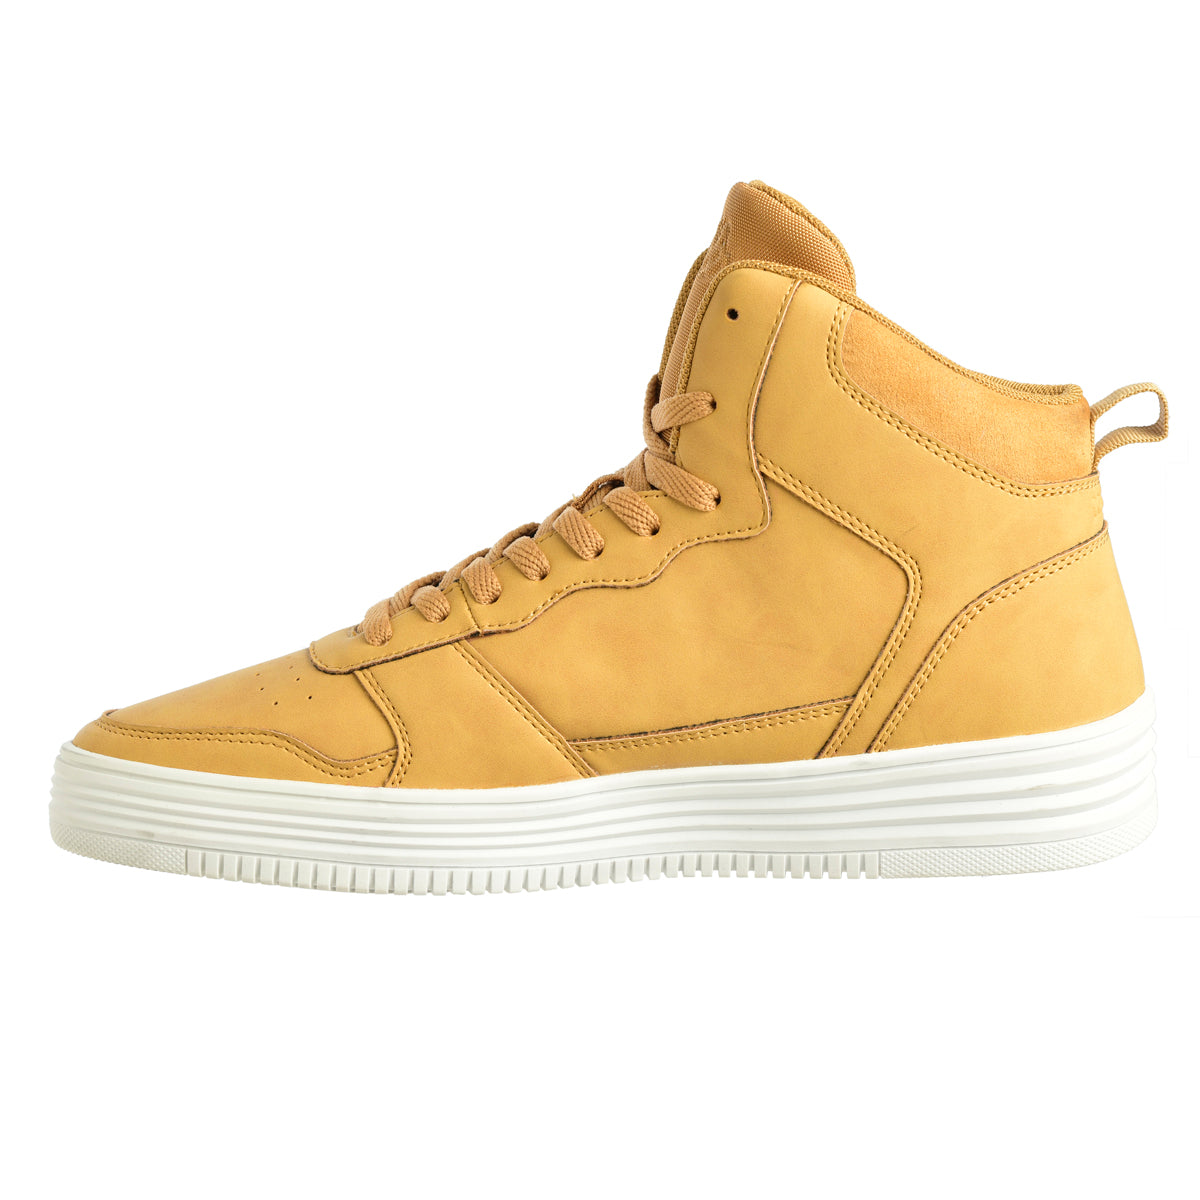 Chaussures lifestyle Seattle Mid Jaune homme - image 2